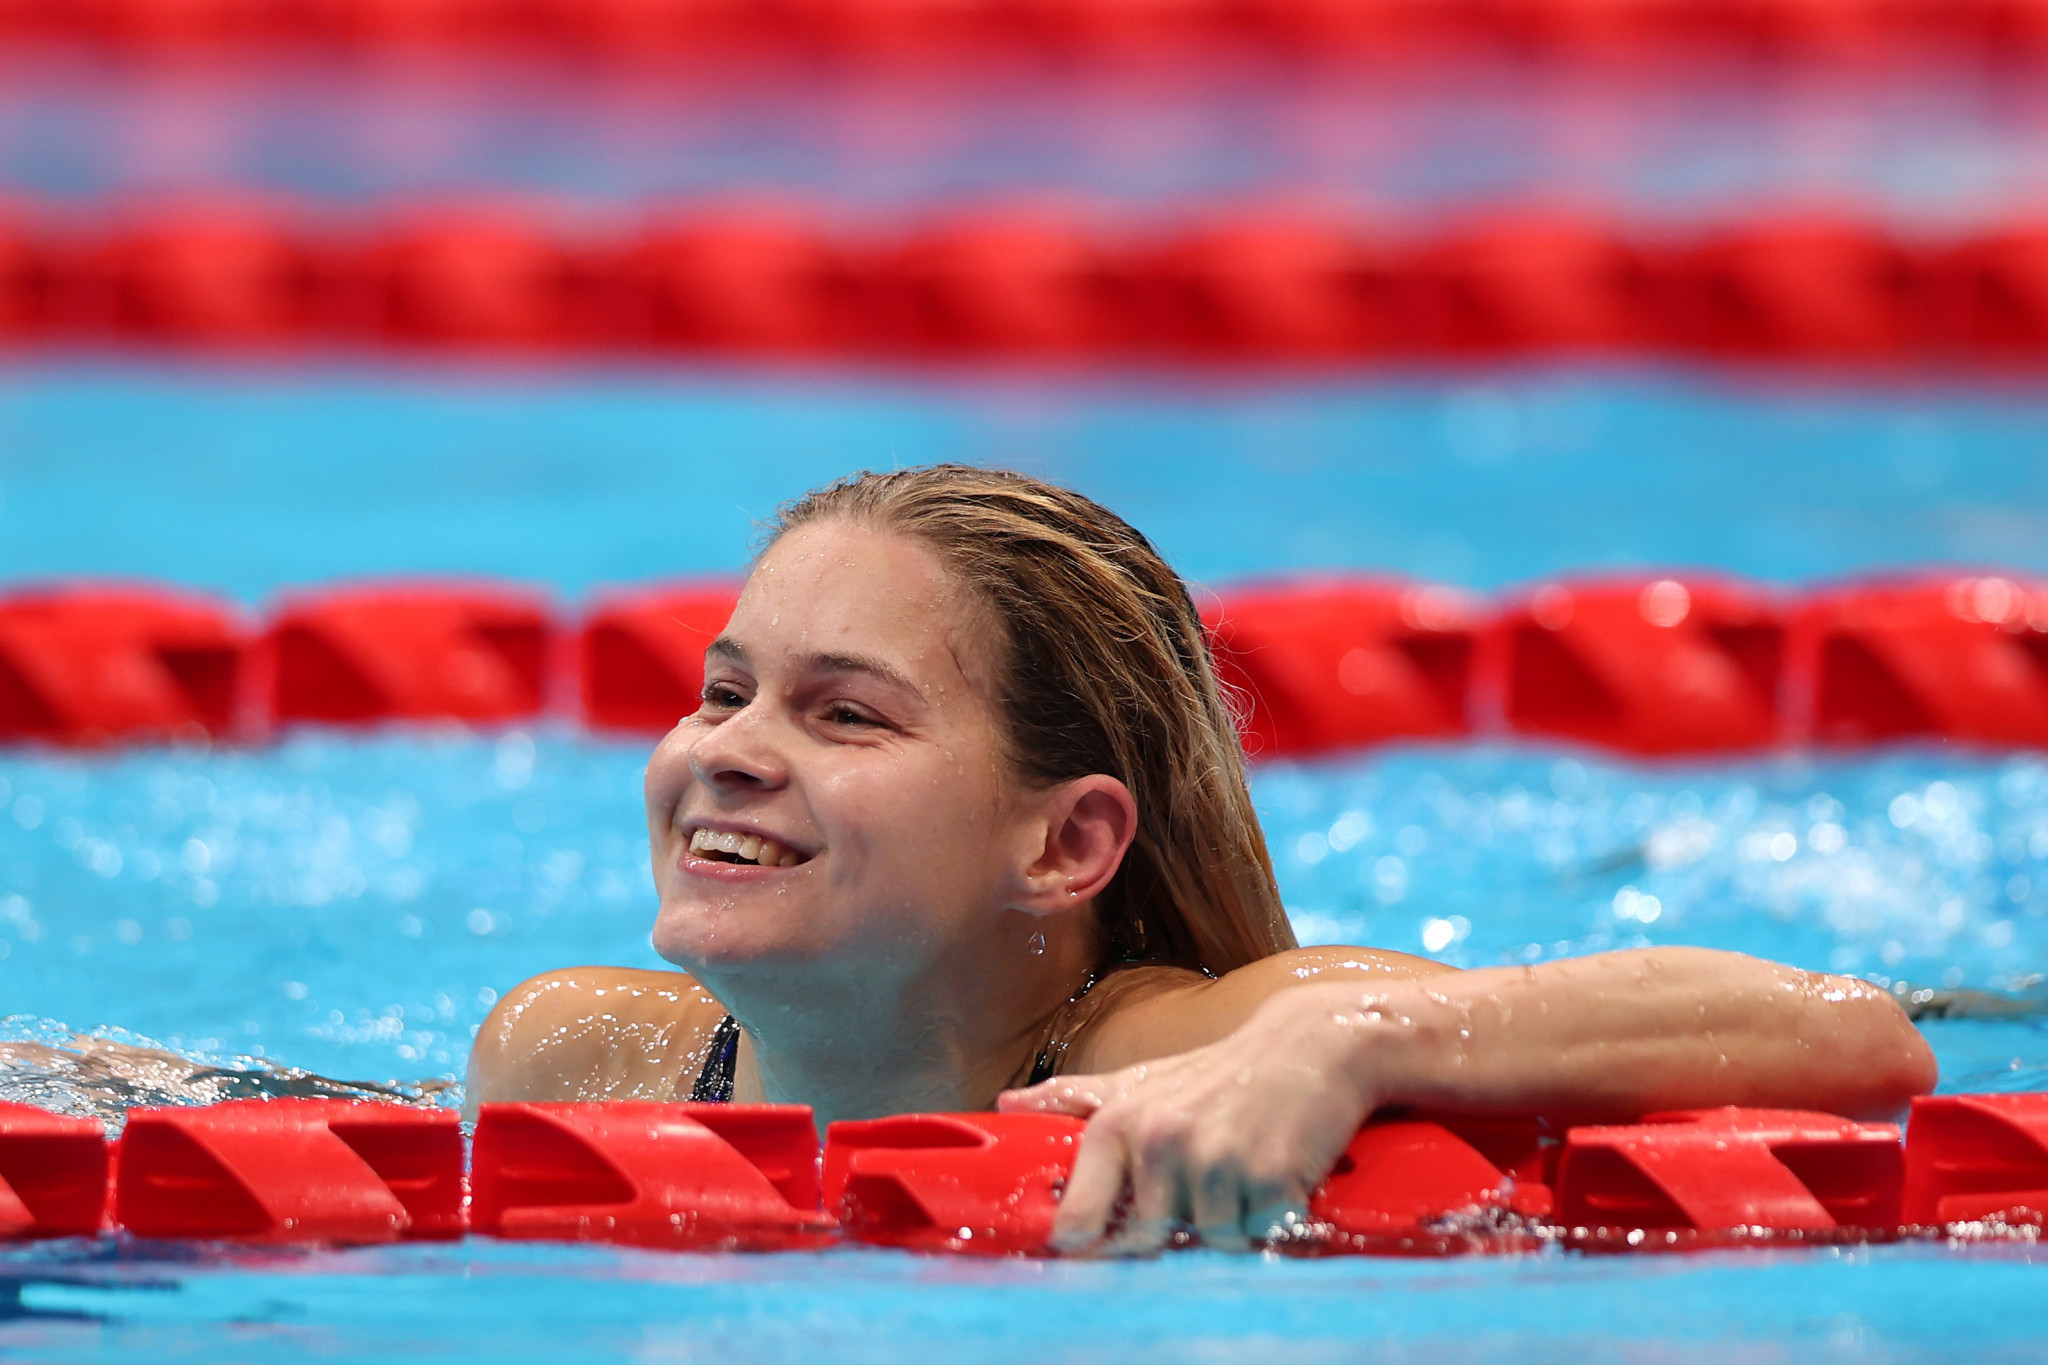 Bianka Pap won the women's S10 100m backstroke for Hungary ©Getty Images